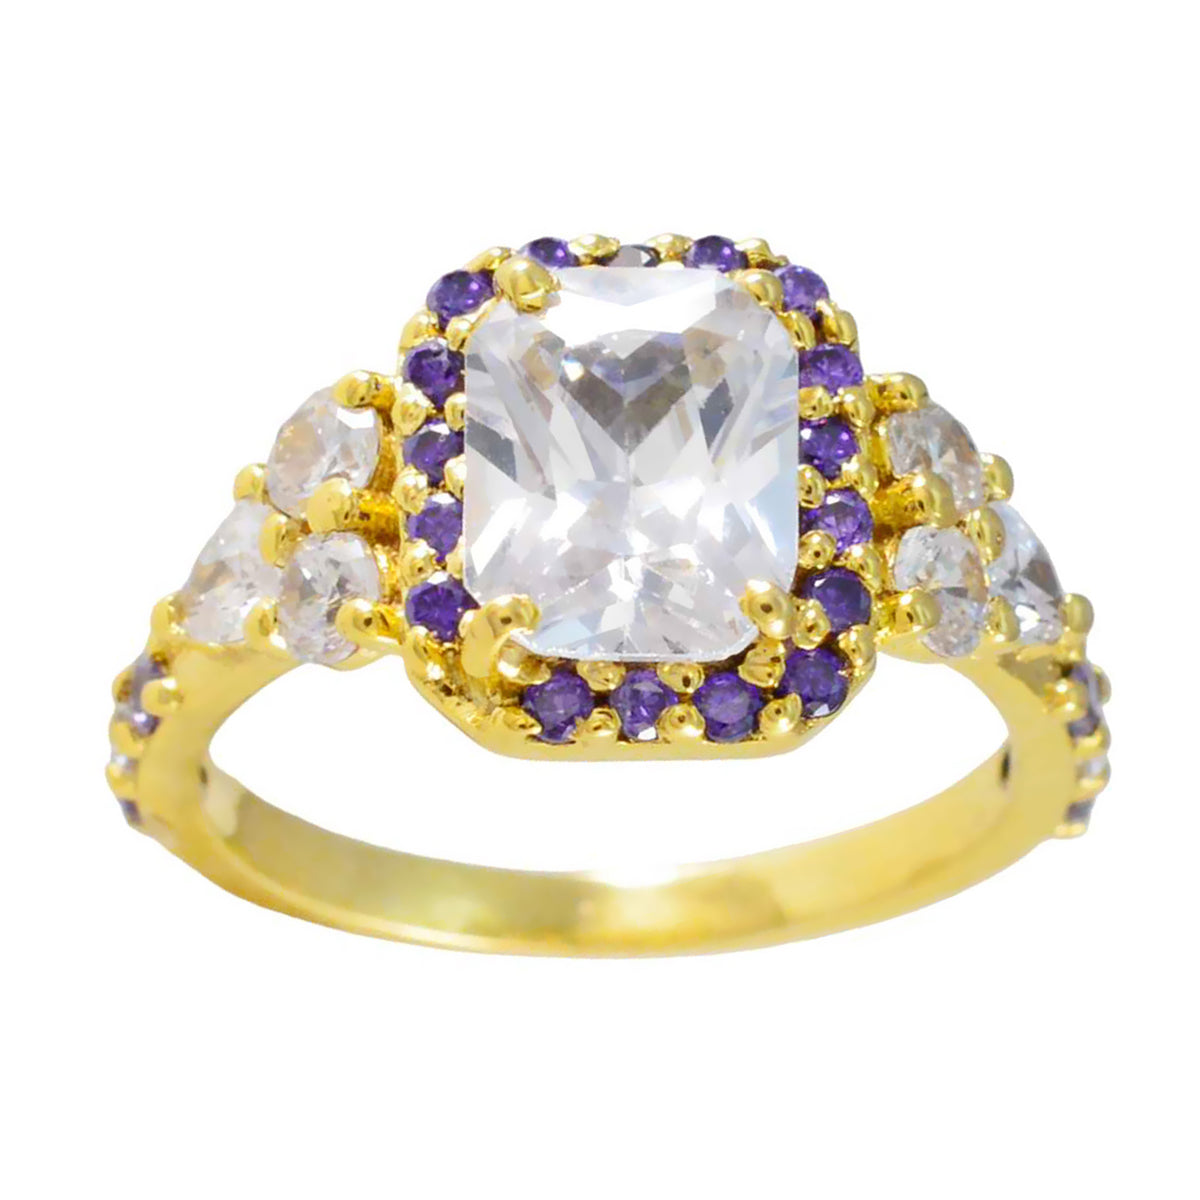 Riyo Best Silver Ring With Yellow Gold Plating Amethyst Stone Octagon Shape Prong Setting Antique Jewelry Cocktail Ring